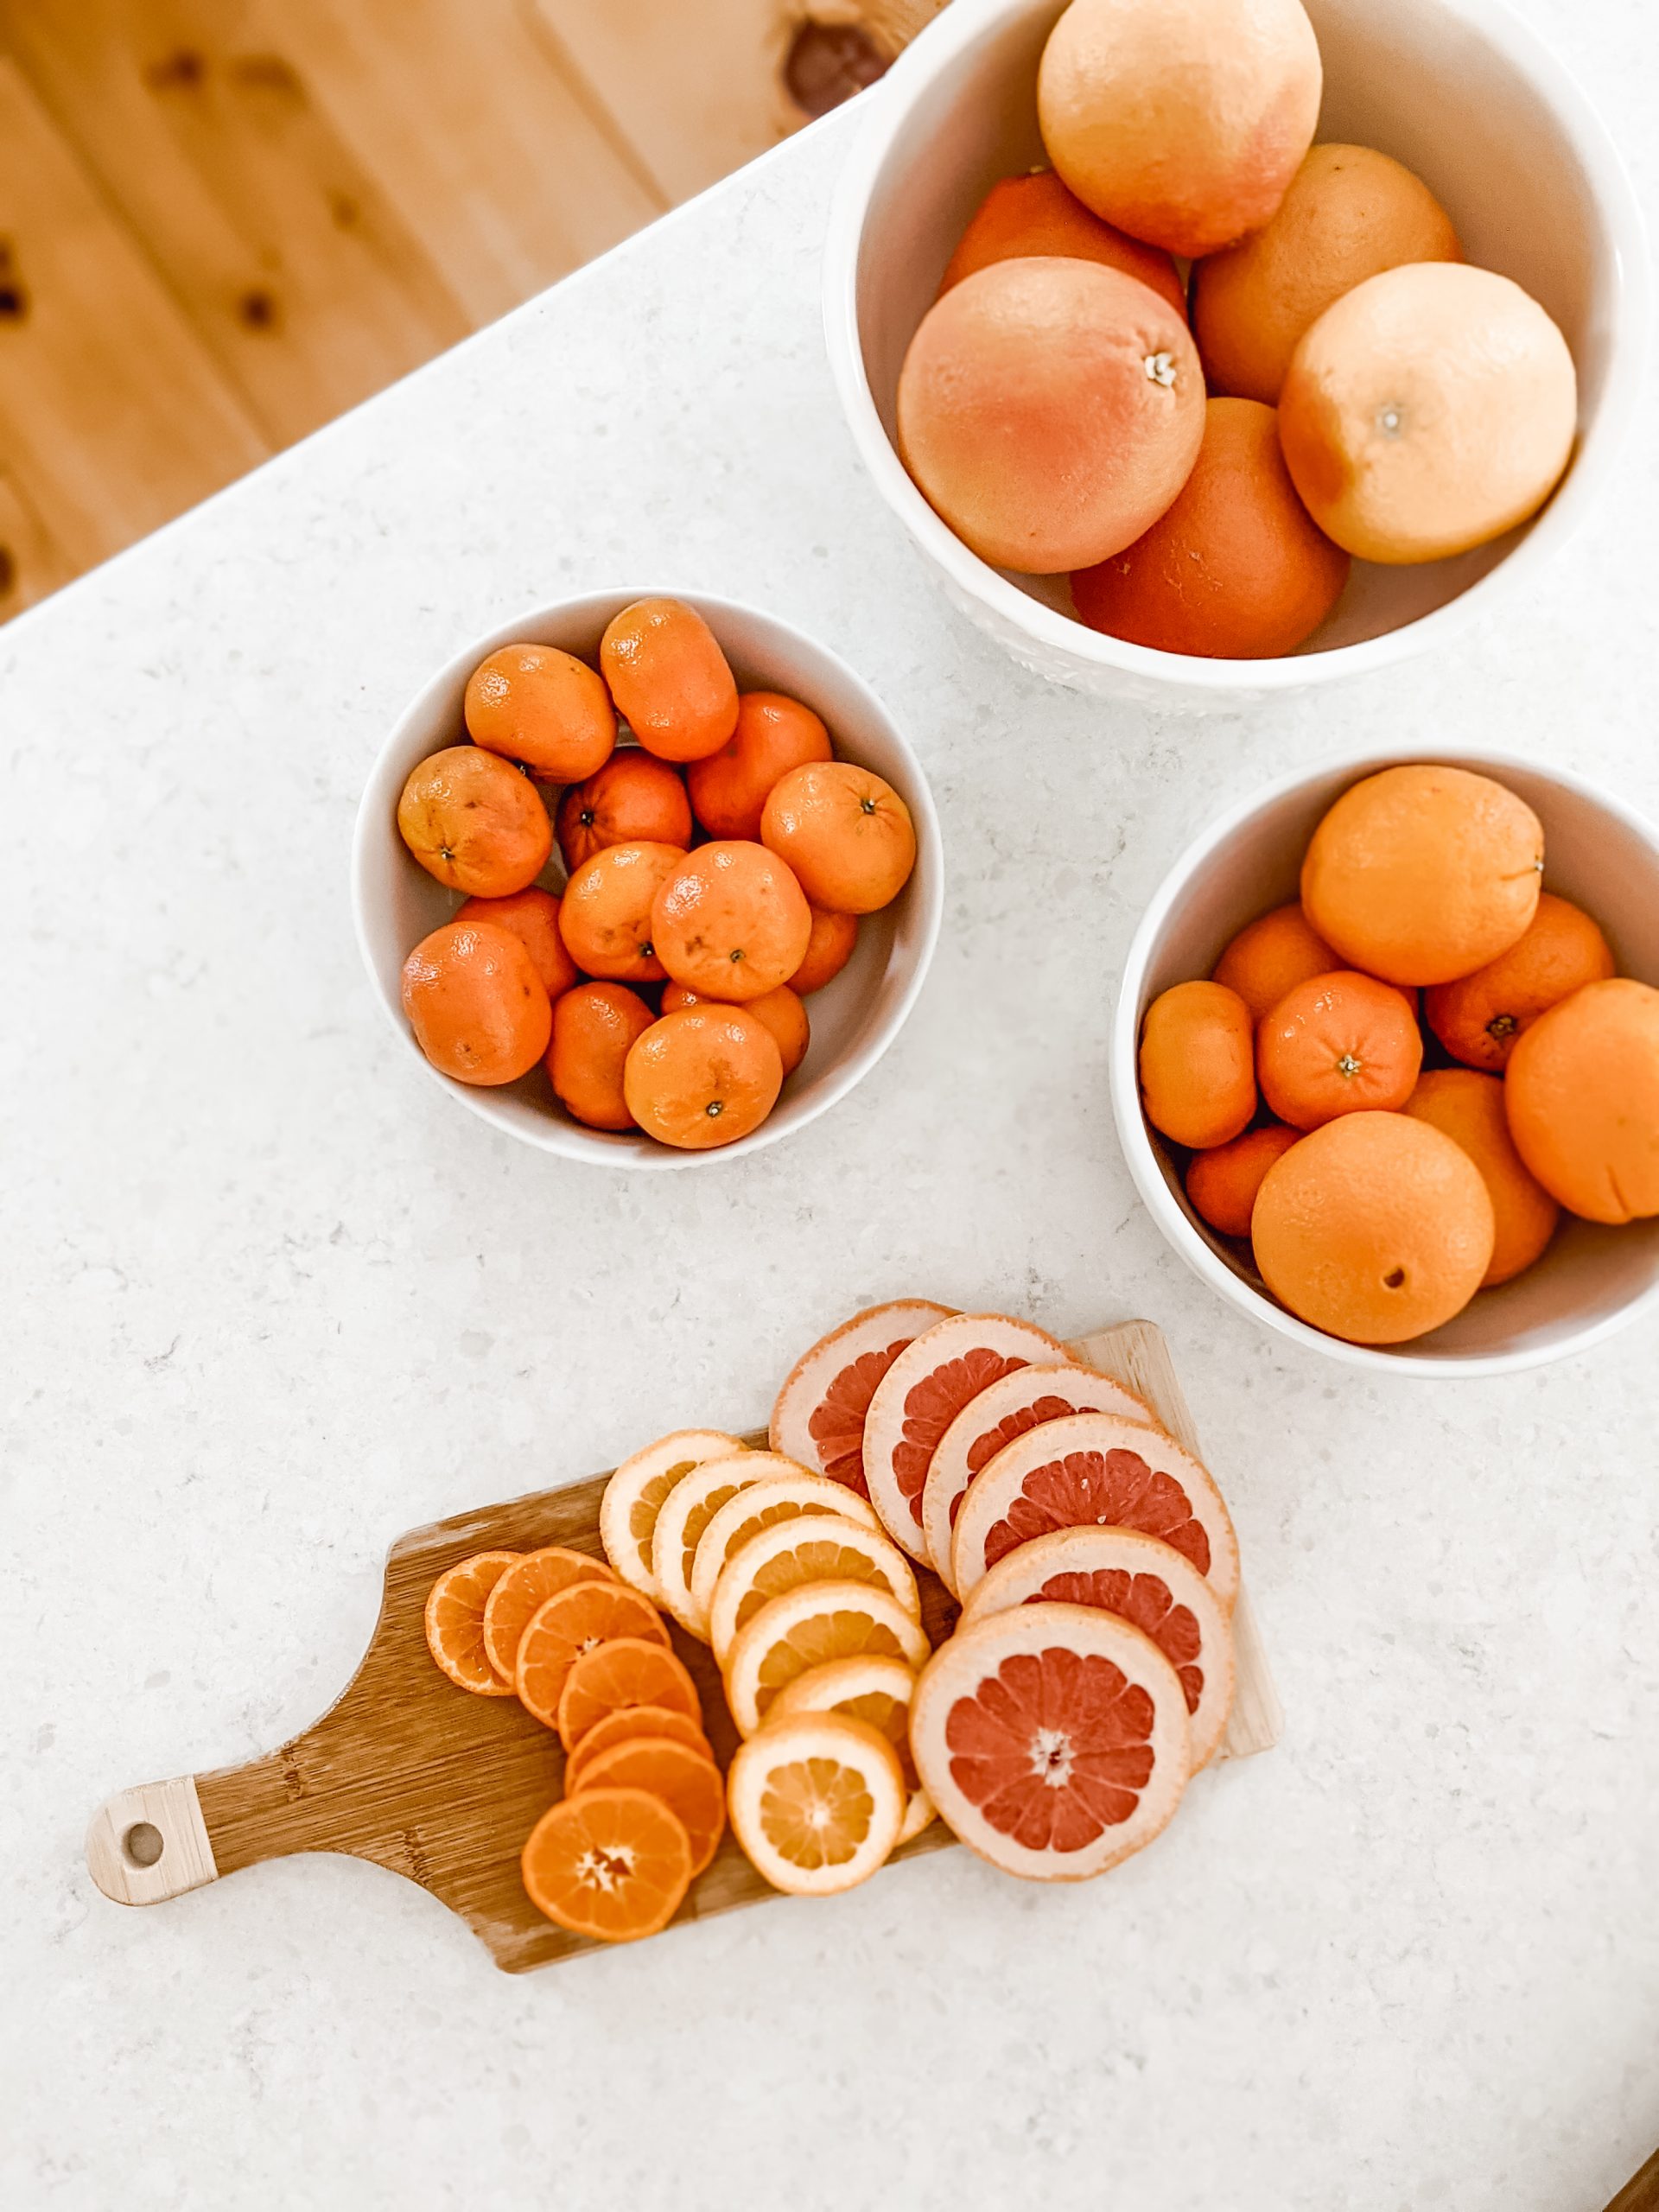 how to dry oranges, grapefruit and clementines